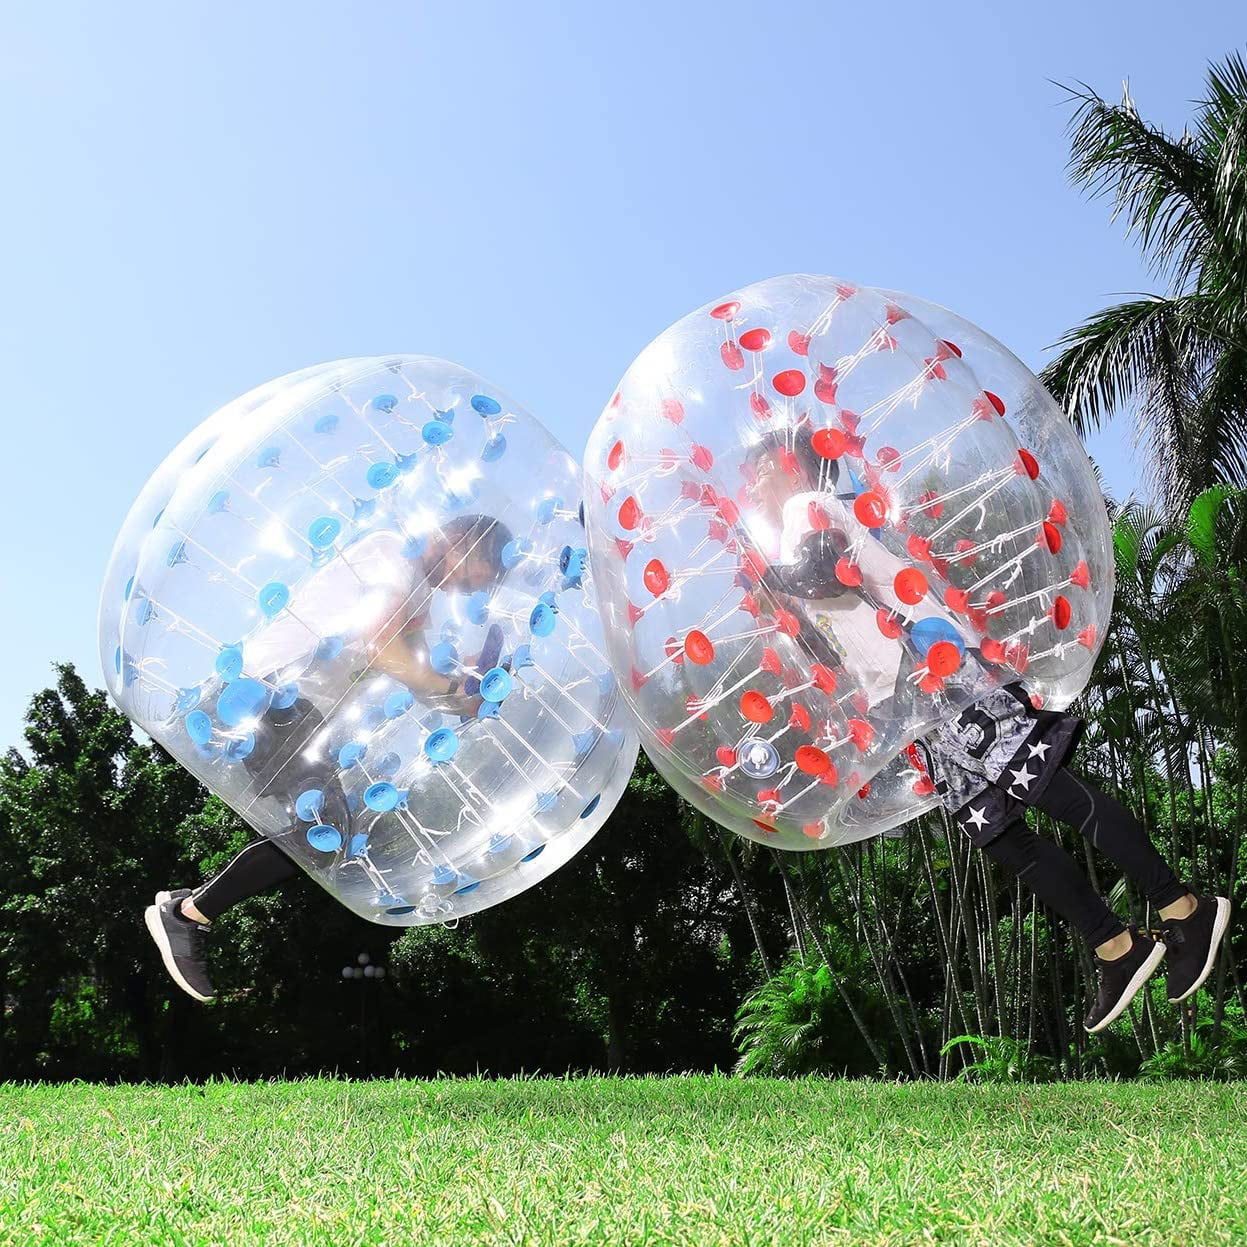 Hurbo Inflatable Bumper Ball Bubble Soccer Ball Giant Human Hamster Ball for Adults and Kids 